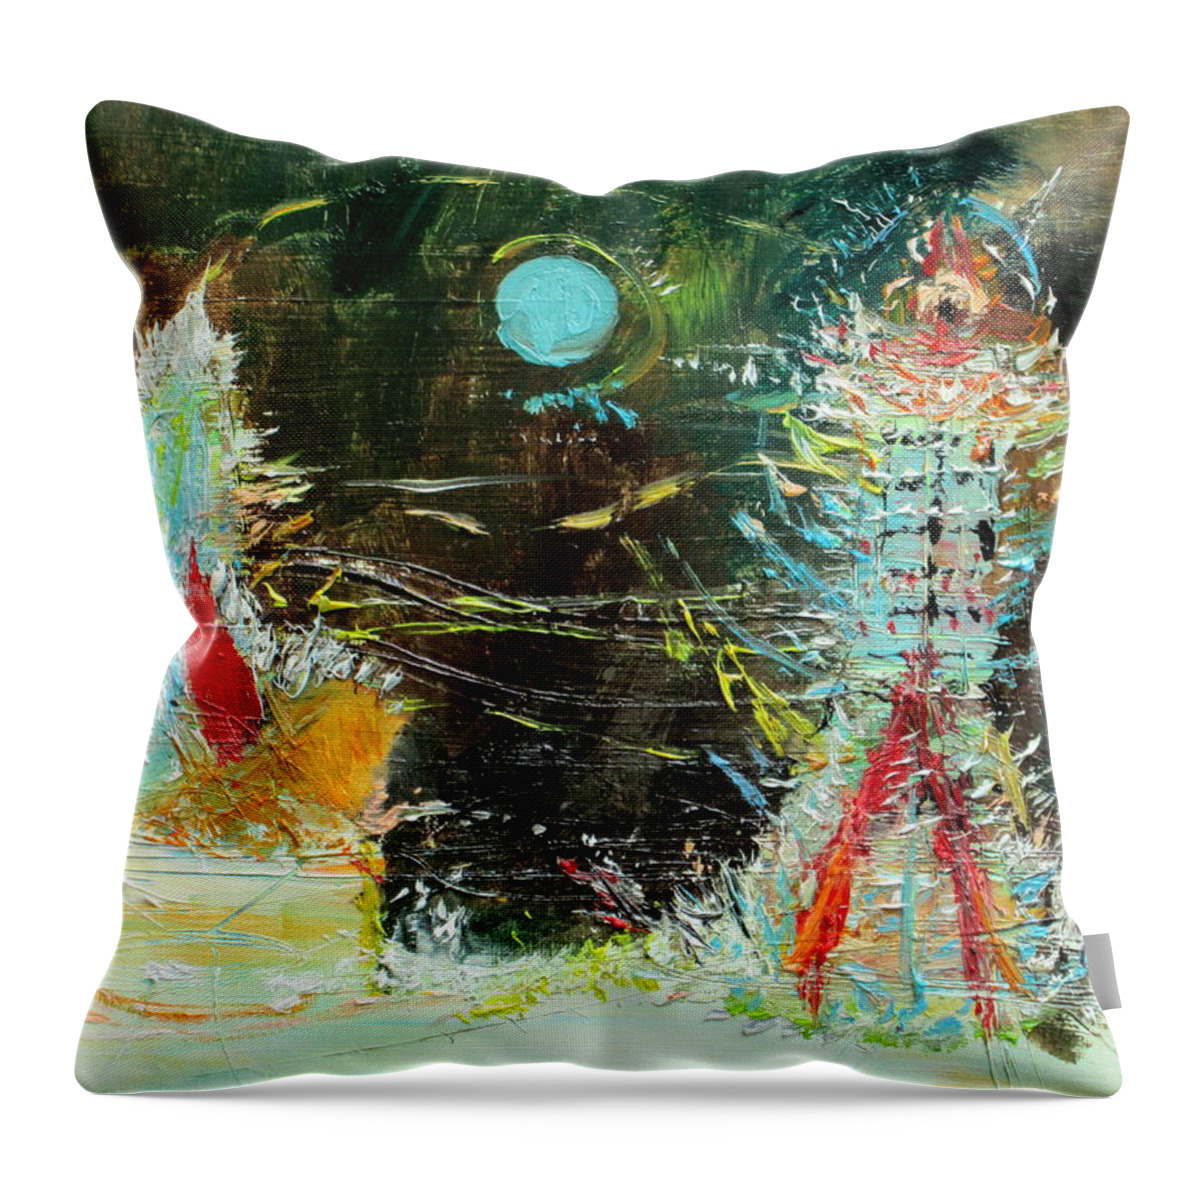 Interplay Throw Pillow featuring the painting Interplay by Fabrizio Cassetta